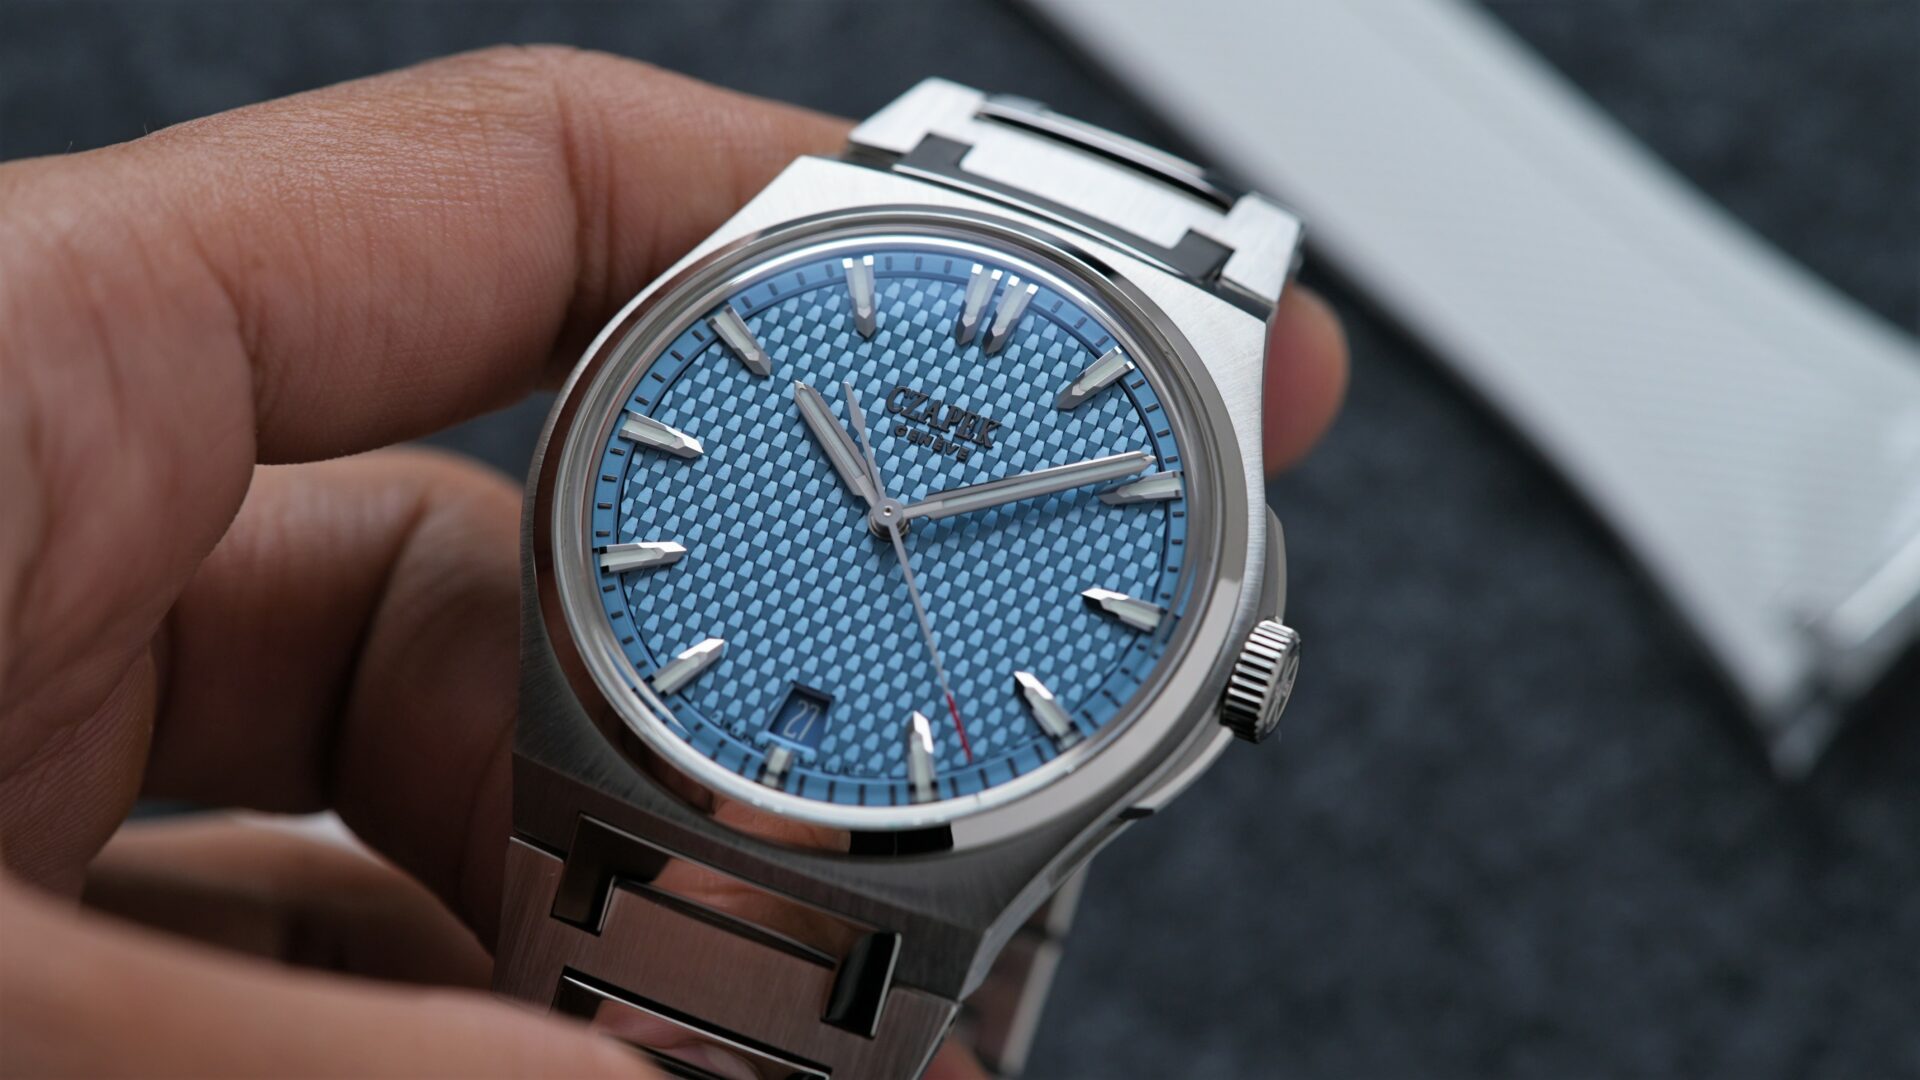 Czapek Passage de Drake Rare Glacier Blue Limited Production watch being displayed in hand.